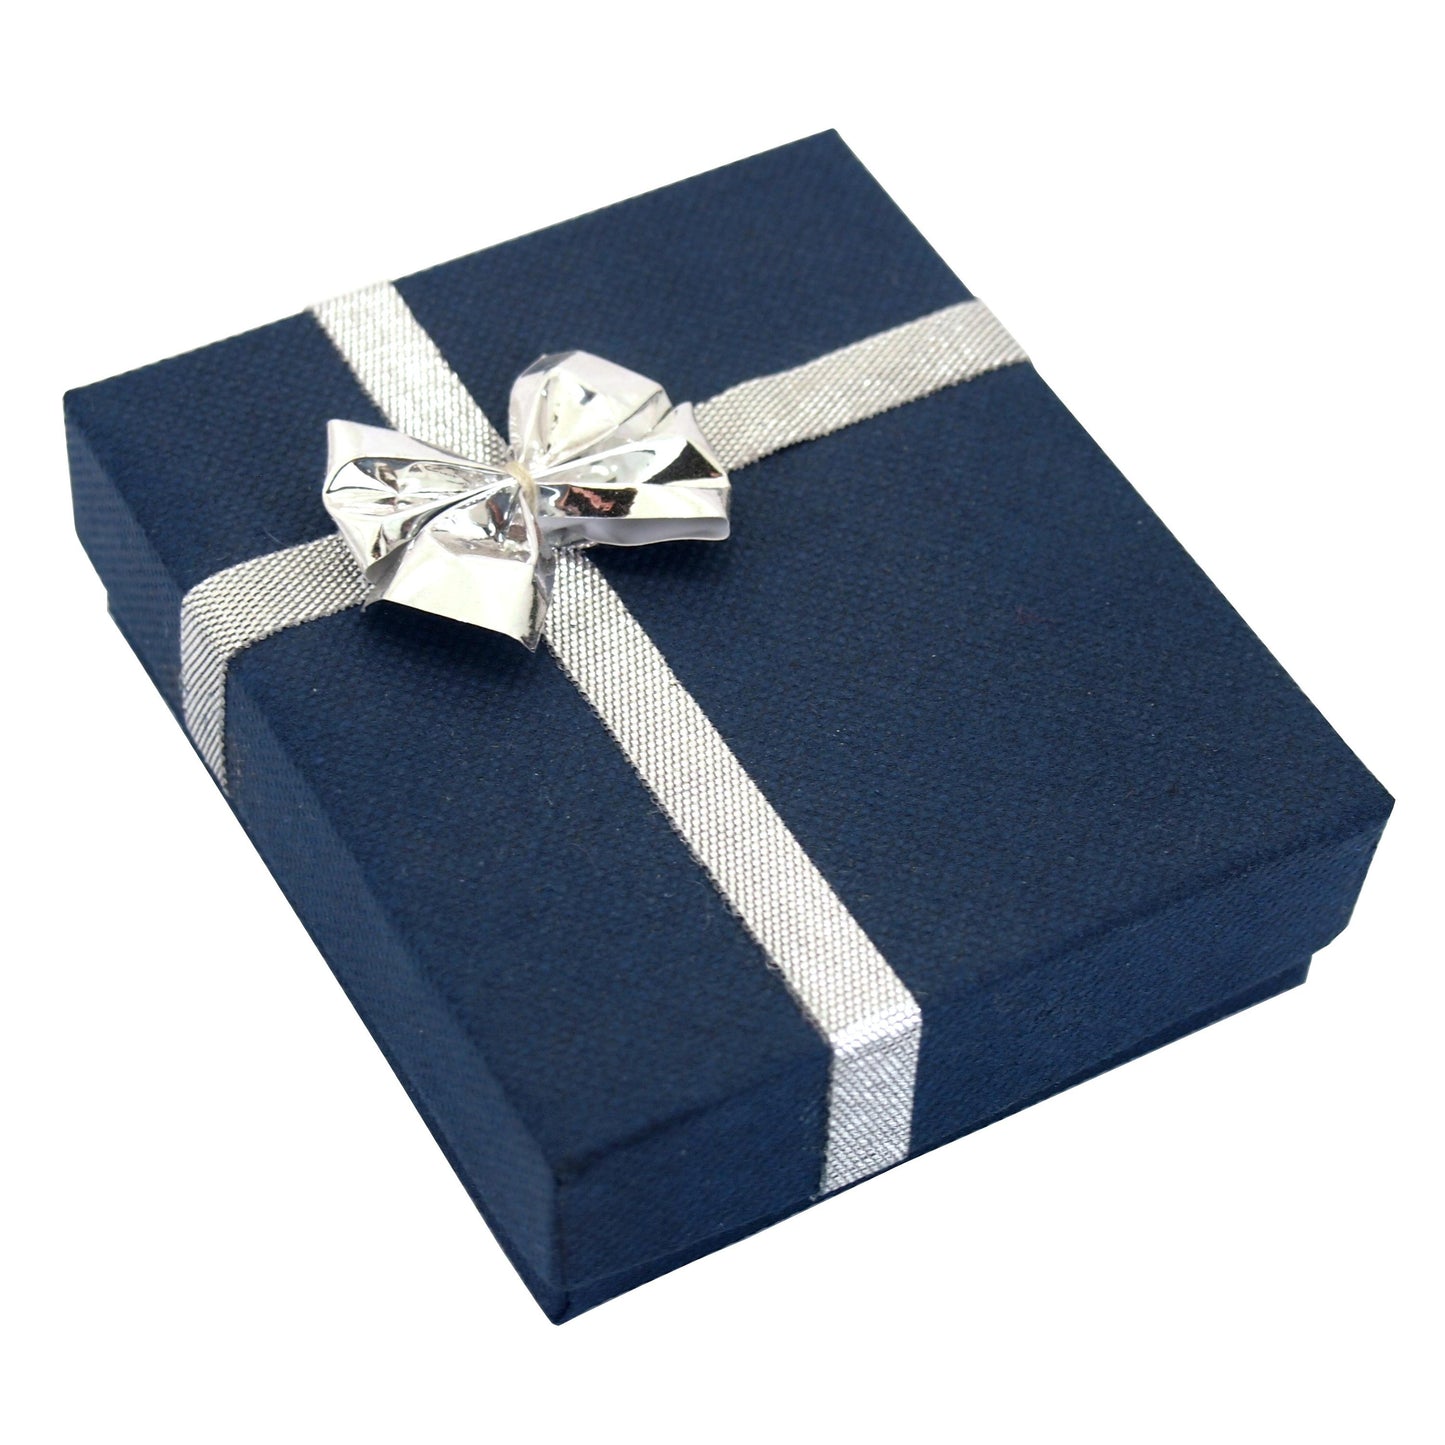 Pendant Bow-Tie Gift Box Blue 2 3/4" (Only 1 Box)